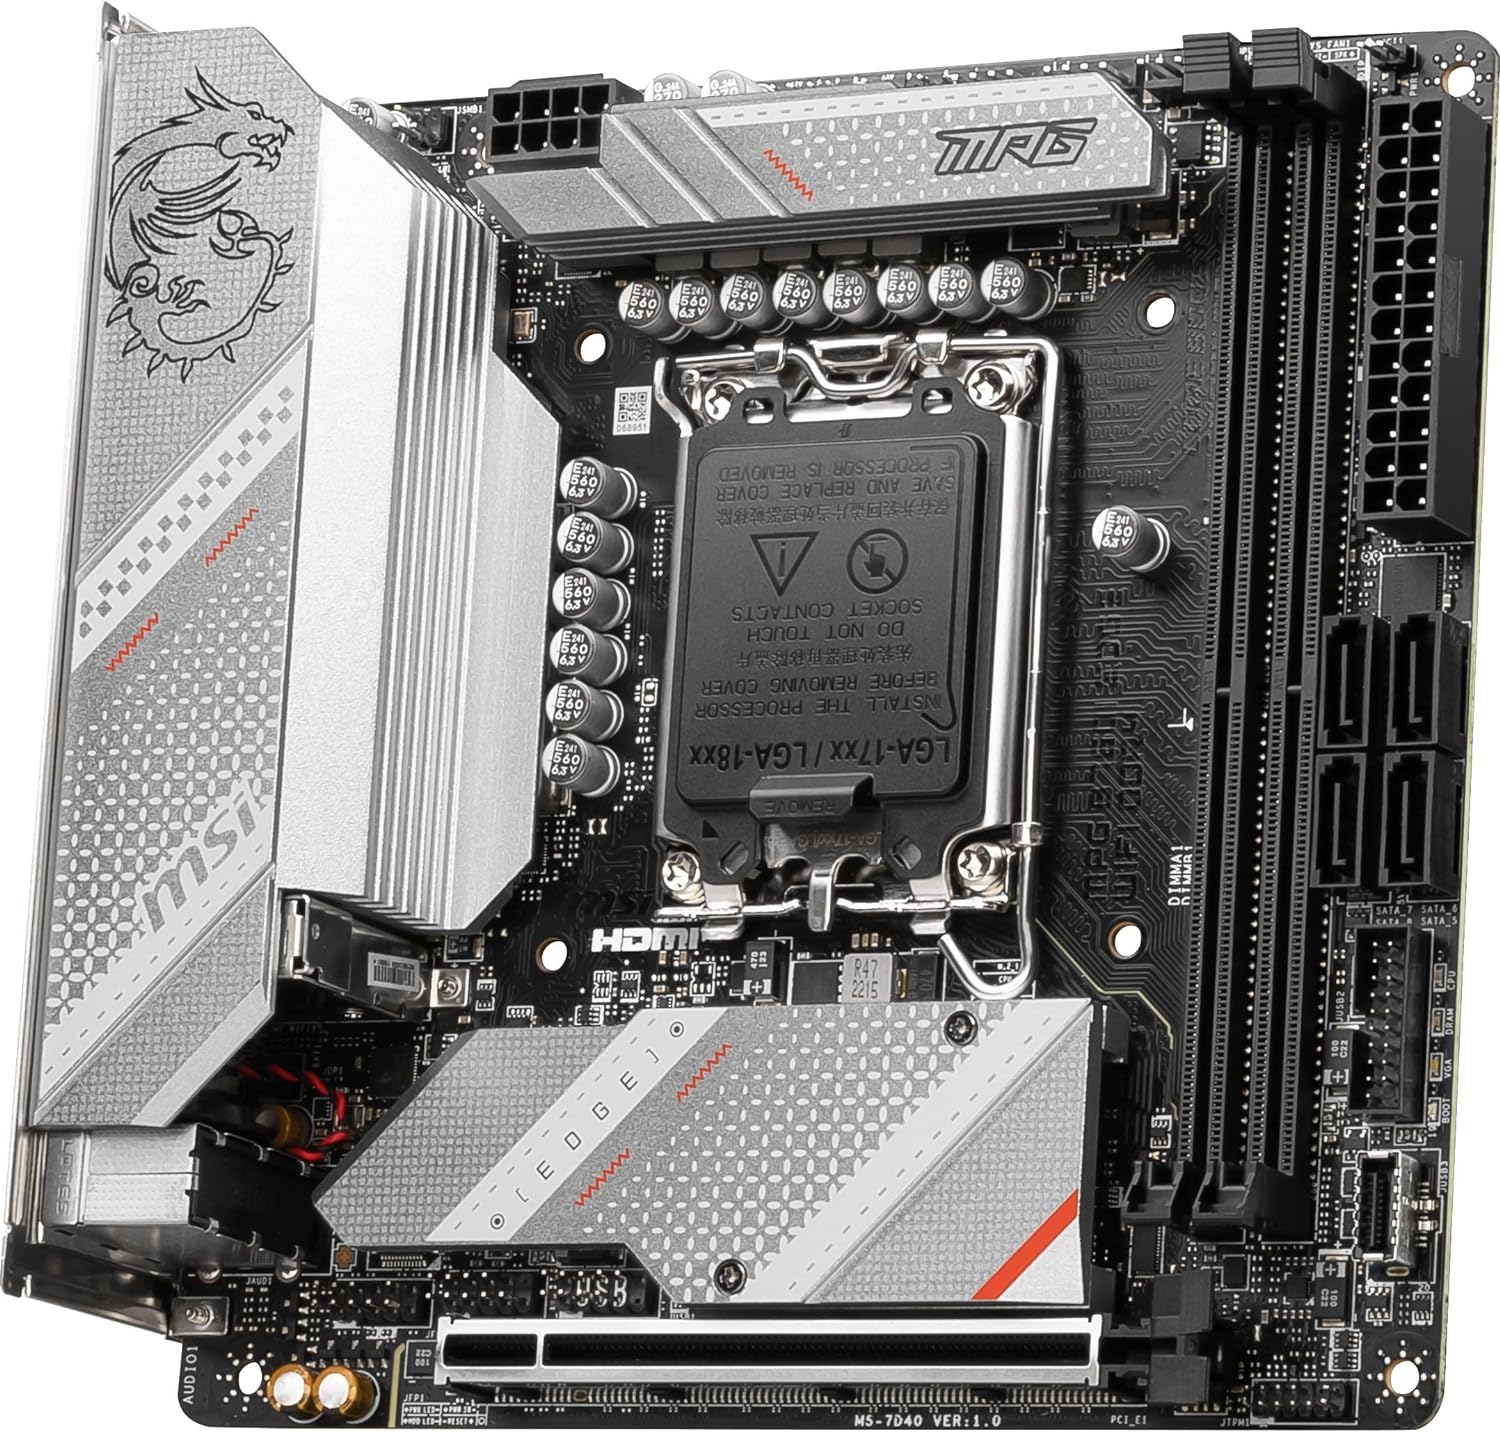 MSI B760i DDR4 WIFI6 Motherboard - AUDIO BOOST feature delivers studio-grade sound quality for an immersive gaming experience. 0824142306512